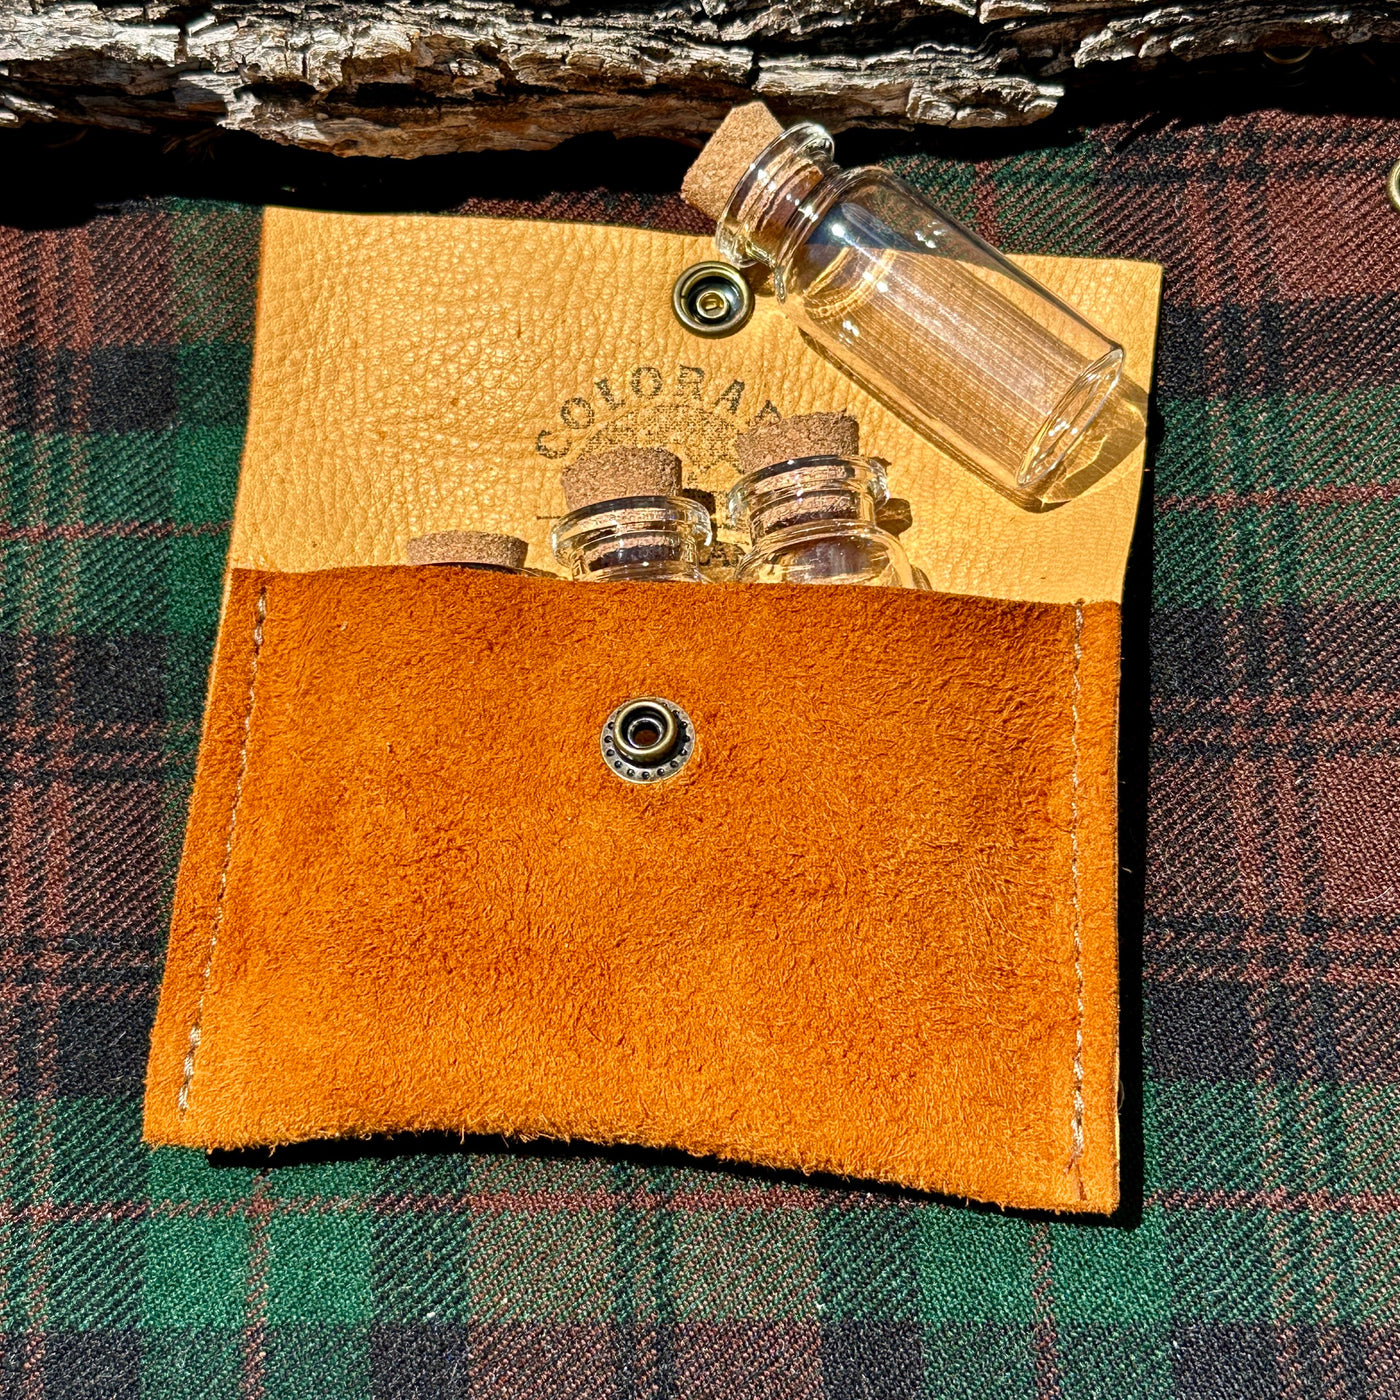 Handmade Deerskin Spice Pouch / Hiking / Bushcraft / Camping / Survival (Includes Bottles)